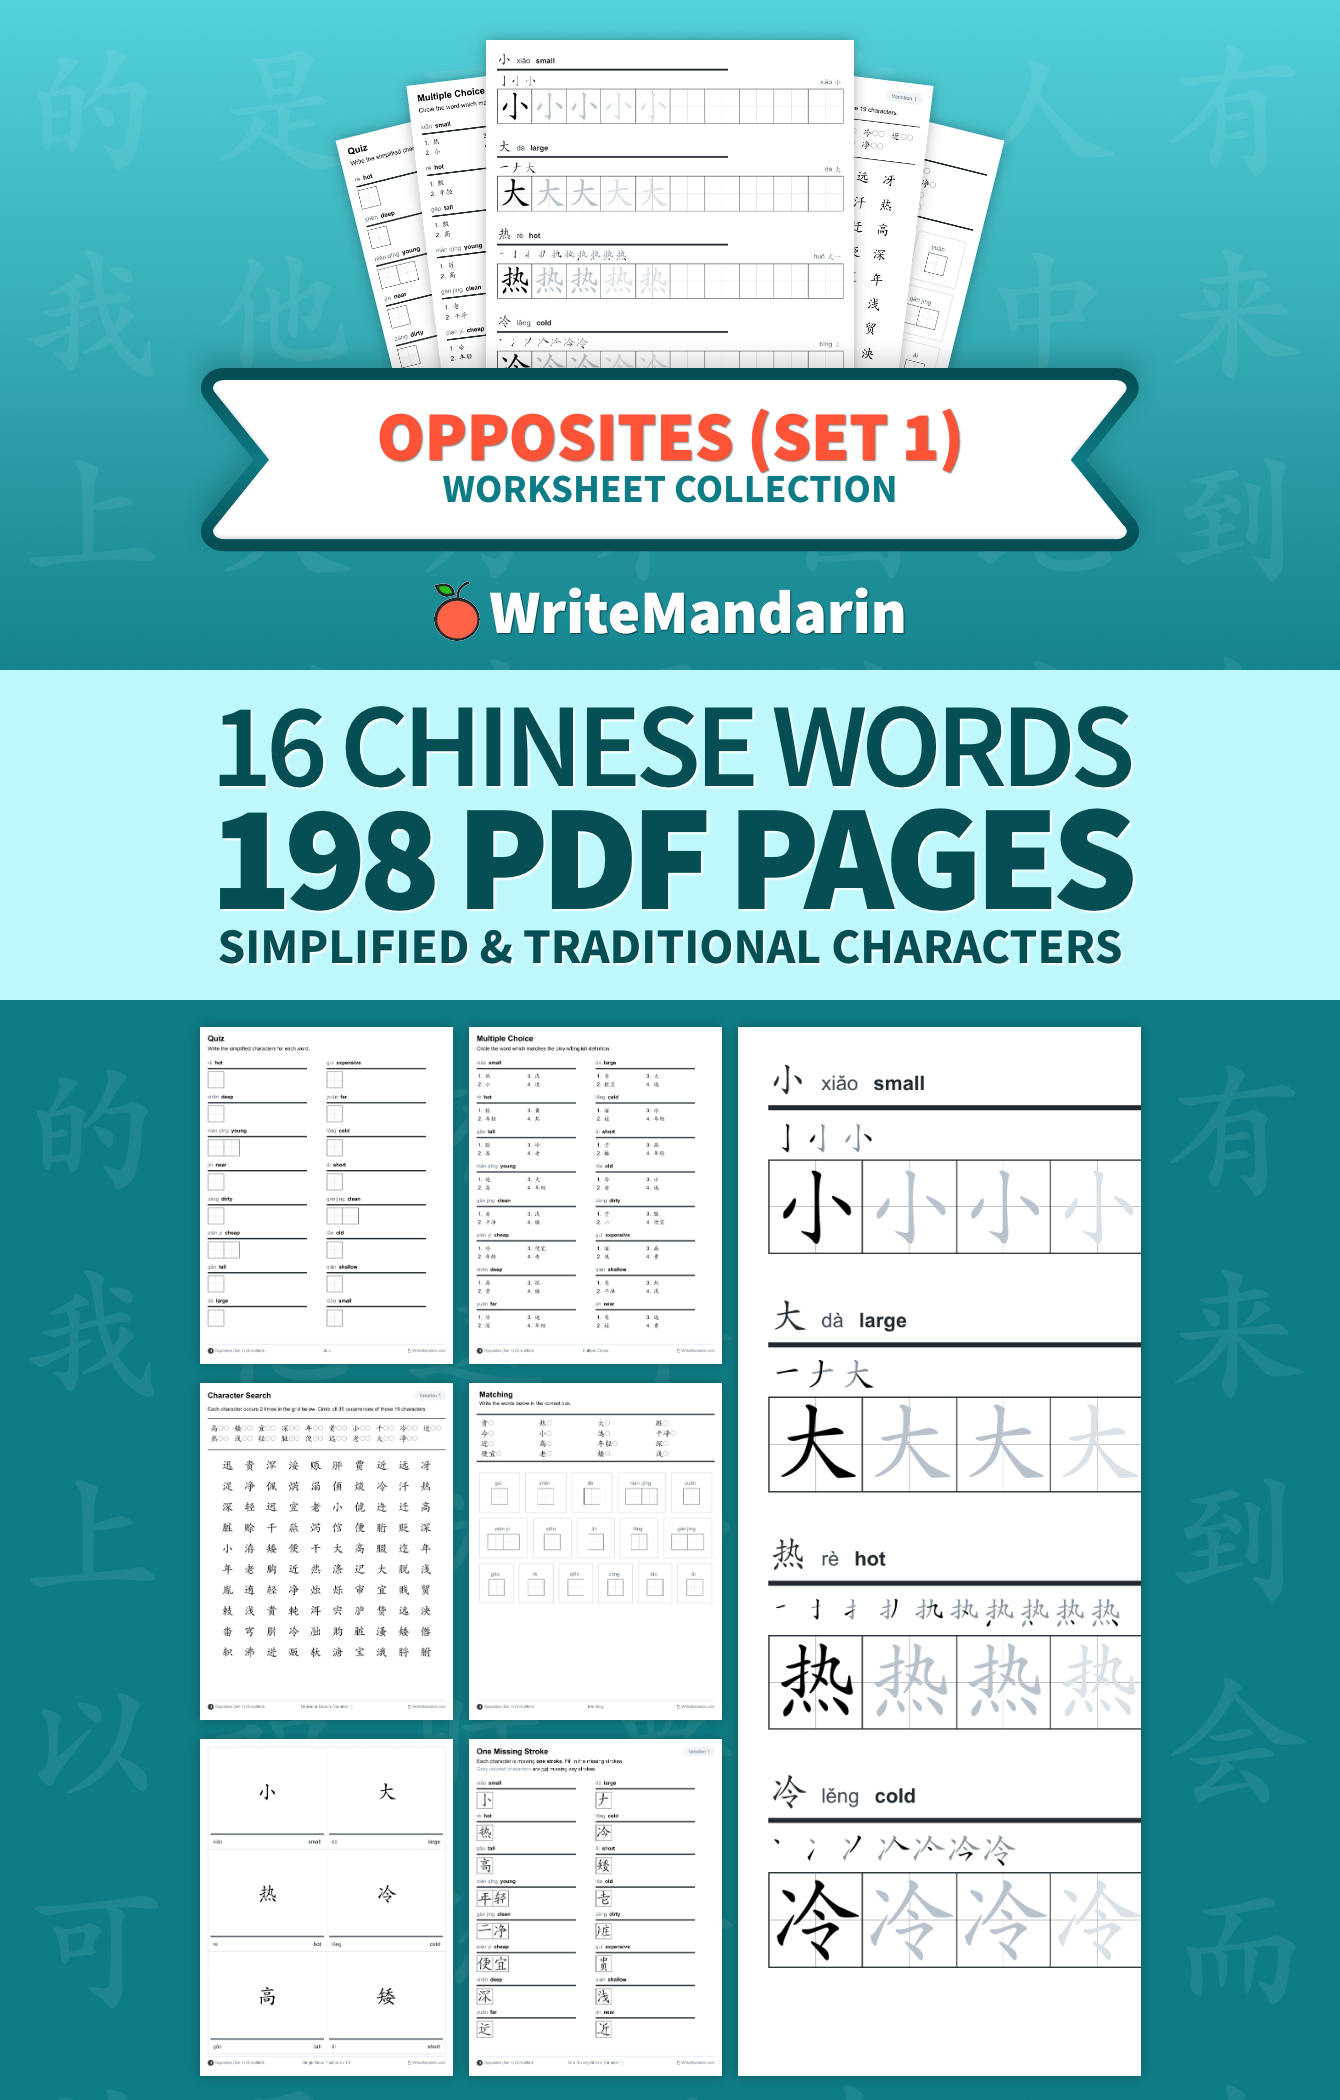 Preview image of Opposites (Set 1) worksheet collection